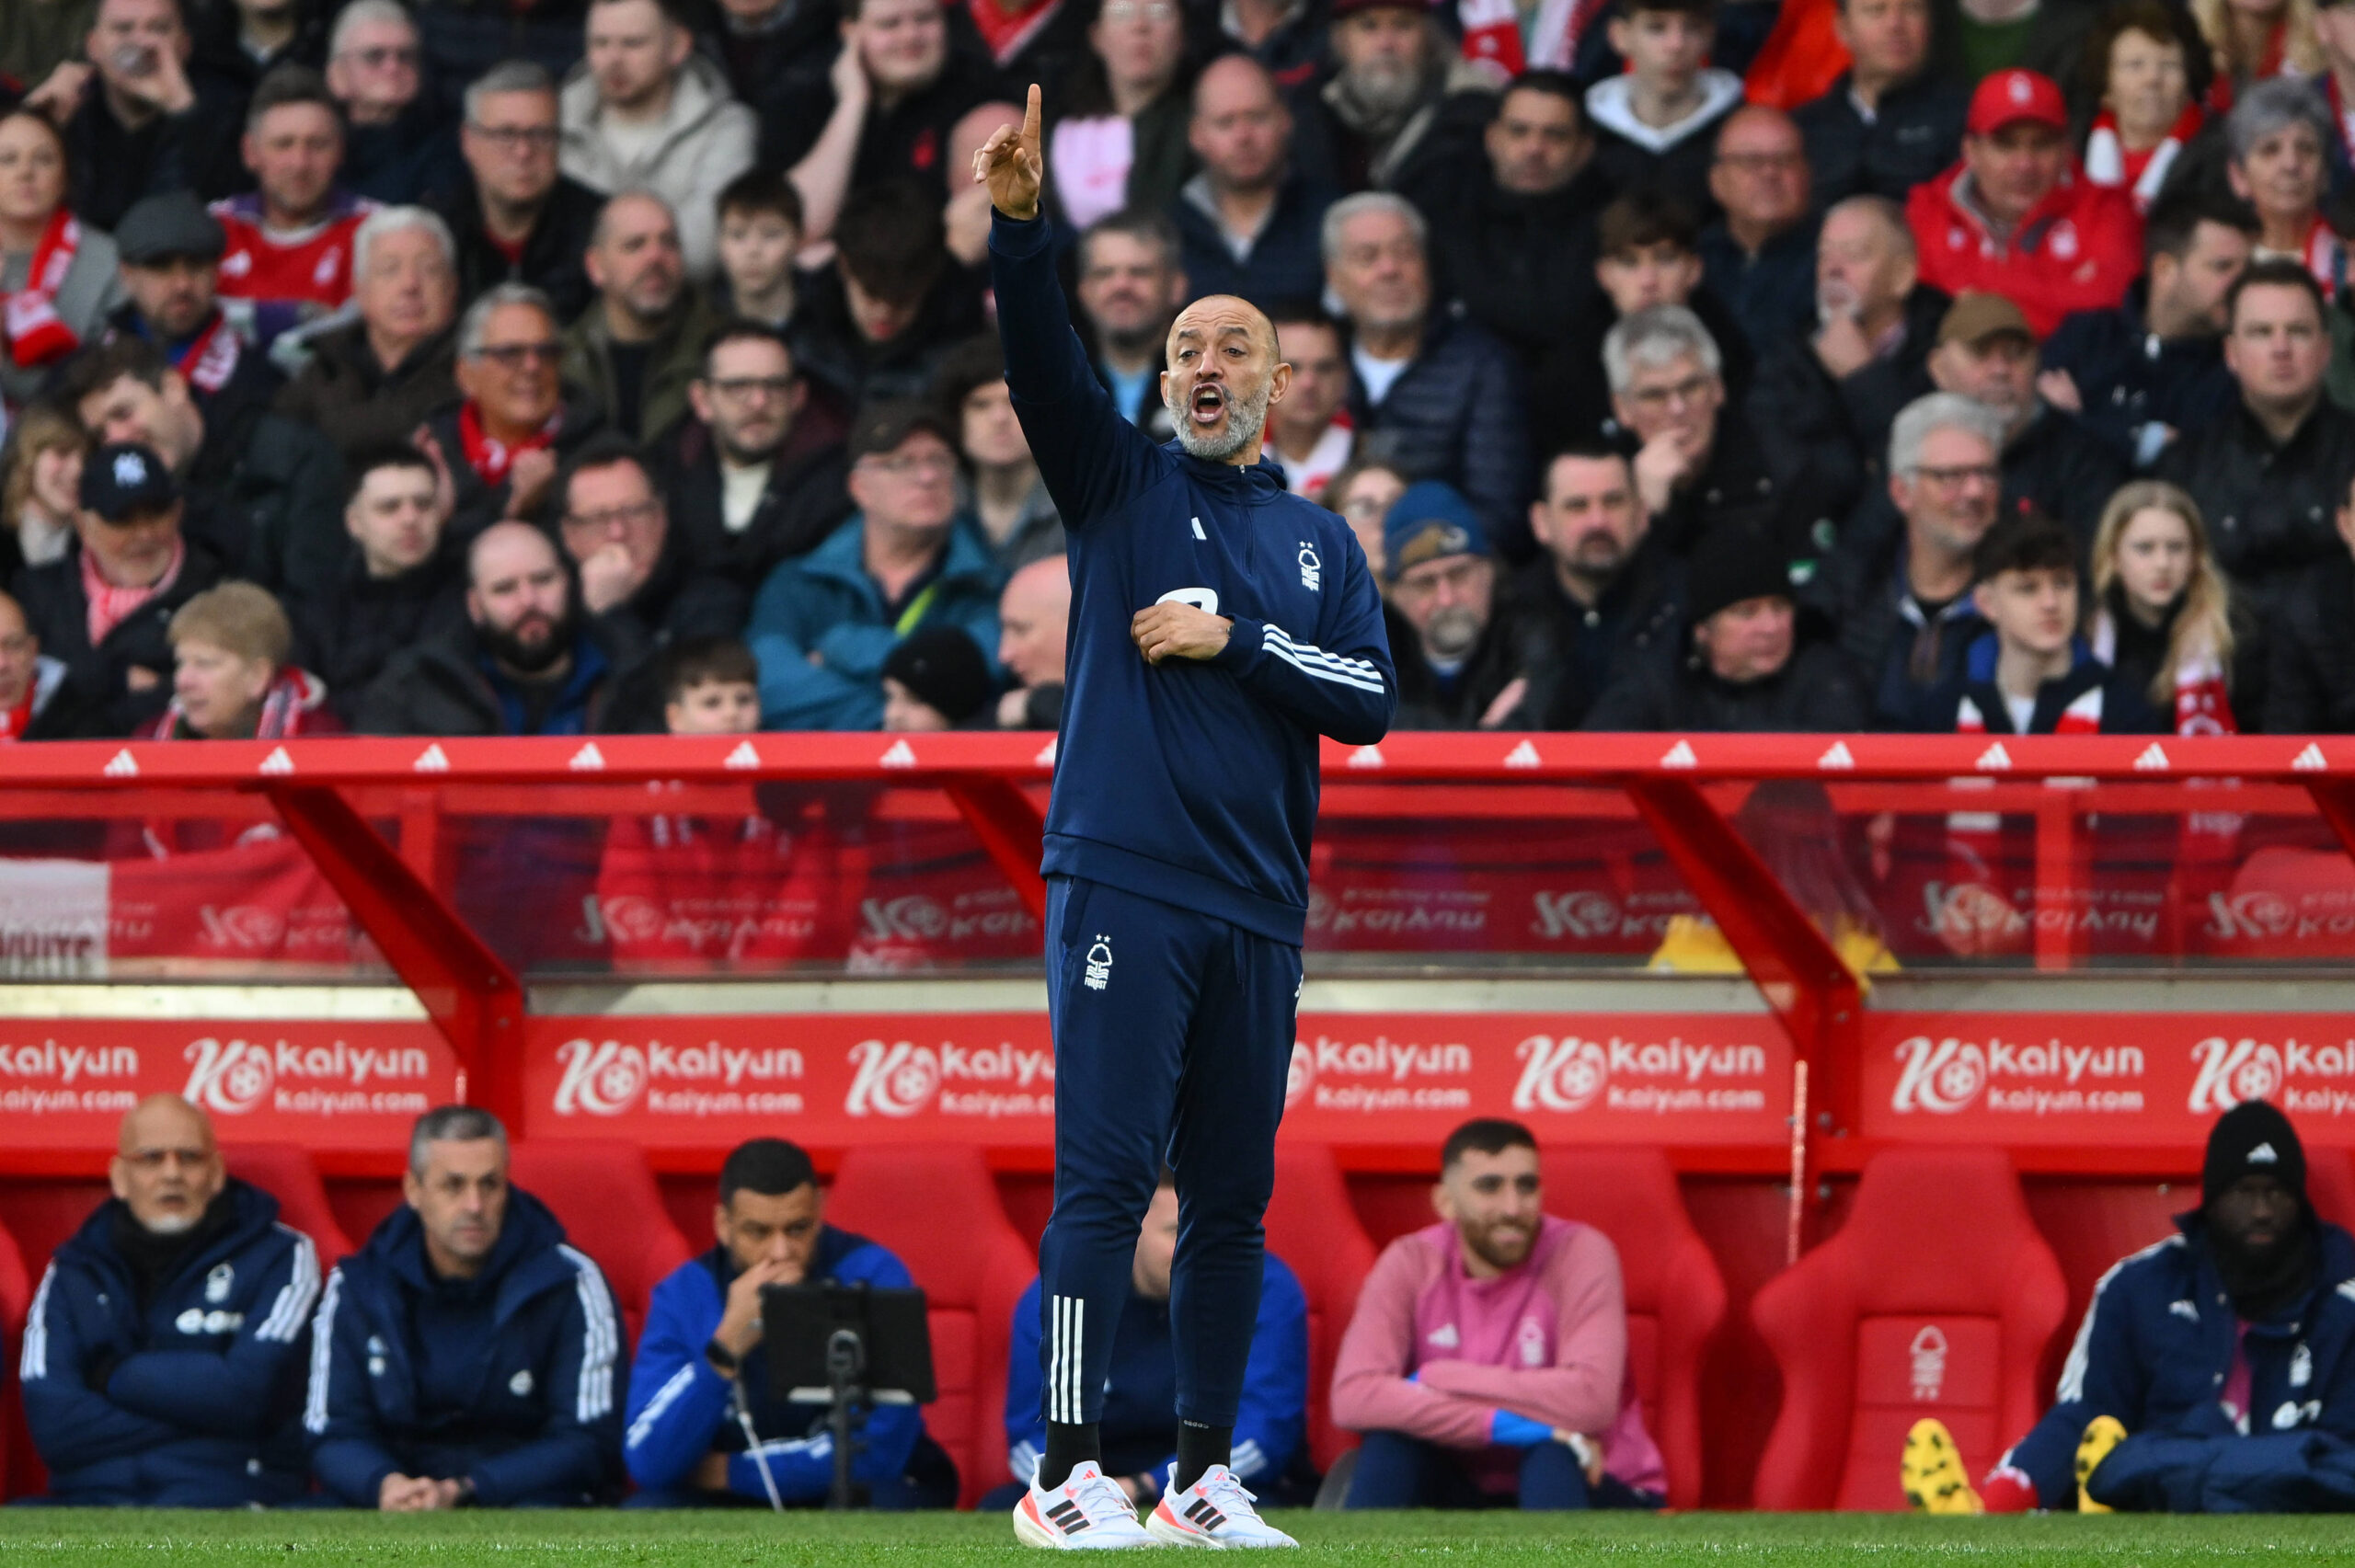 What has Nuno Espírito Santo changed at Nottingham Forest?